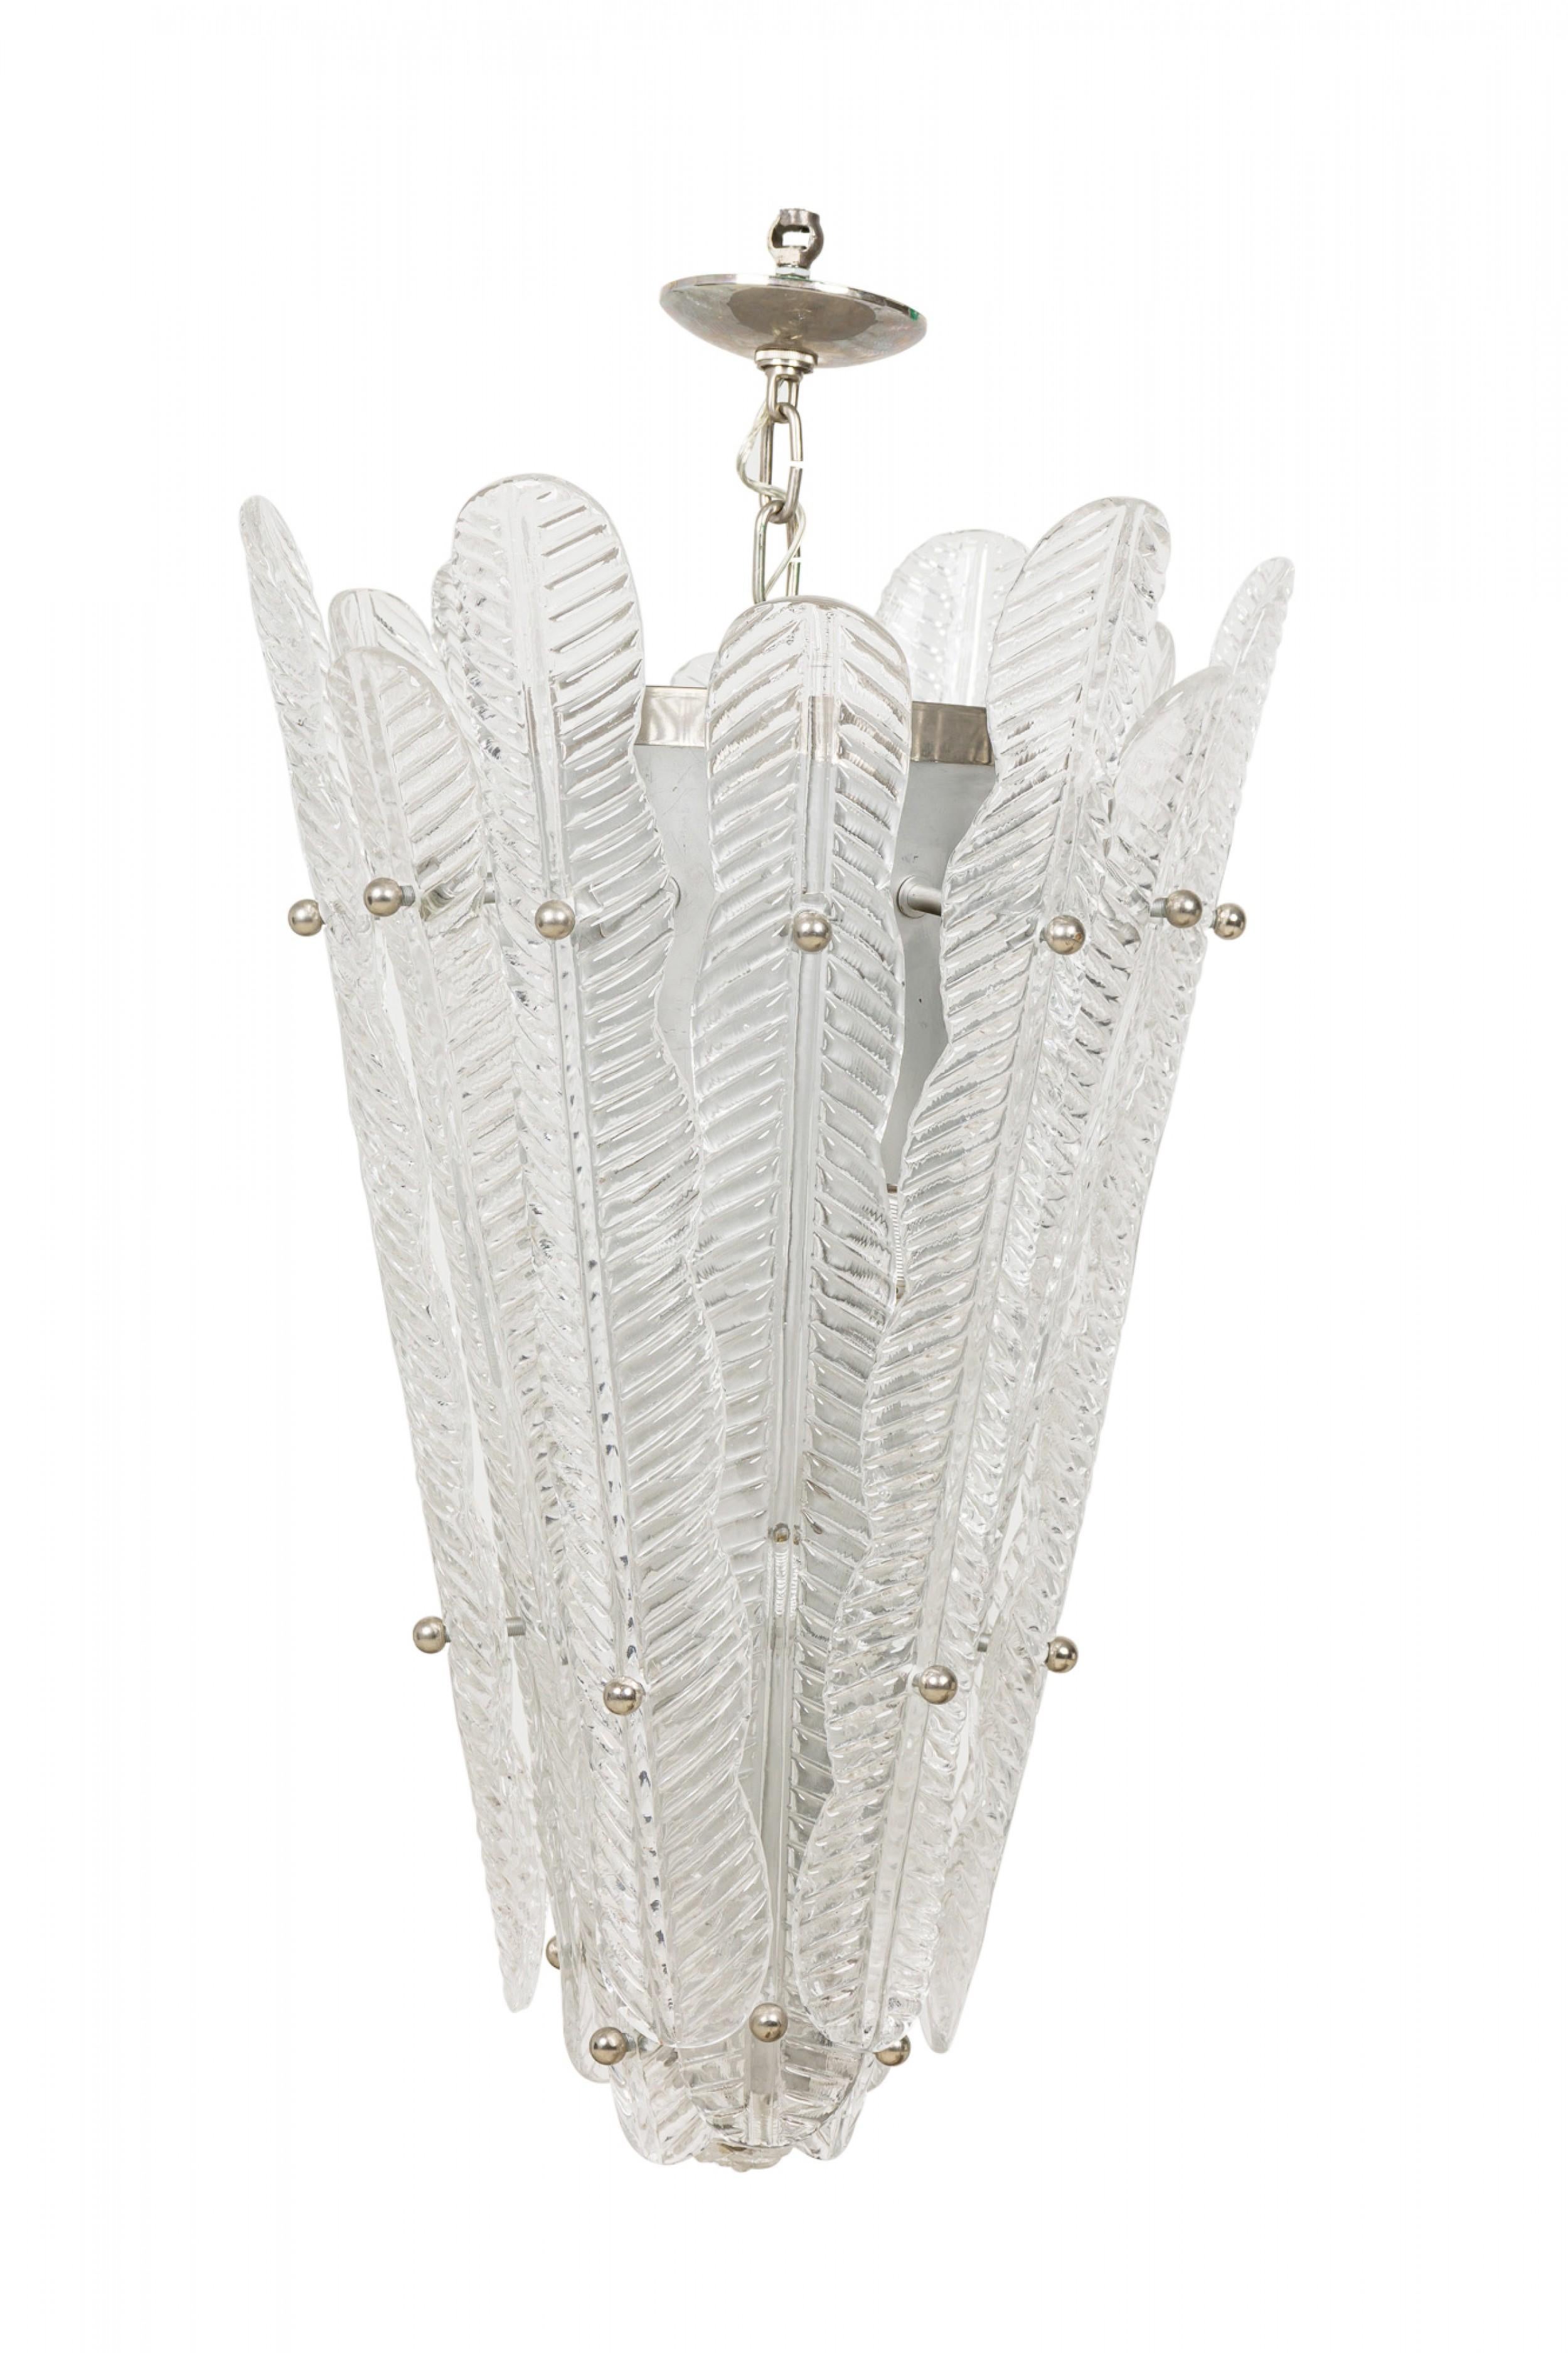 Italian Mid-Century (1940s) pendant chandelier consisting of stylized transparent glass leaves blossoming off sphere-capped silver metal tubular rods with light sockets radiating from a tapered cylindrical silver metal base. (MURANO).